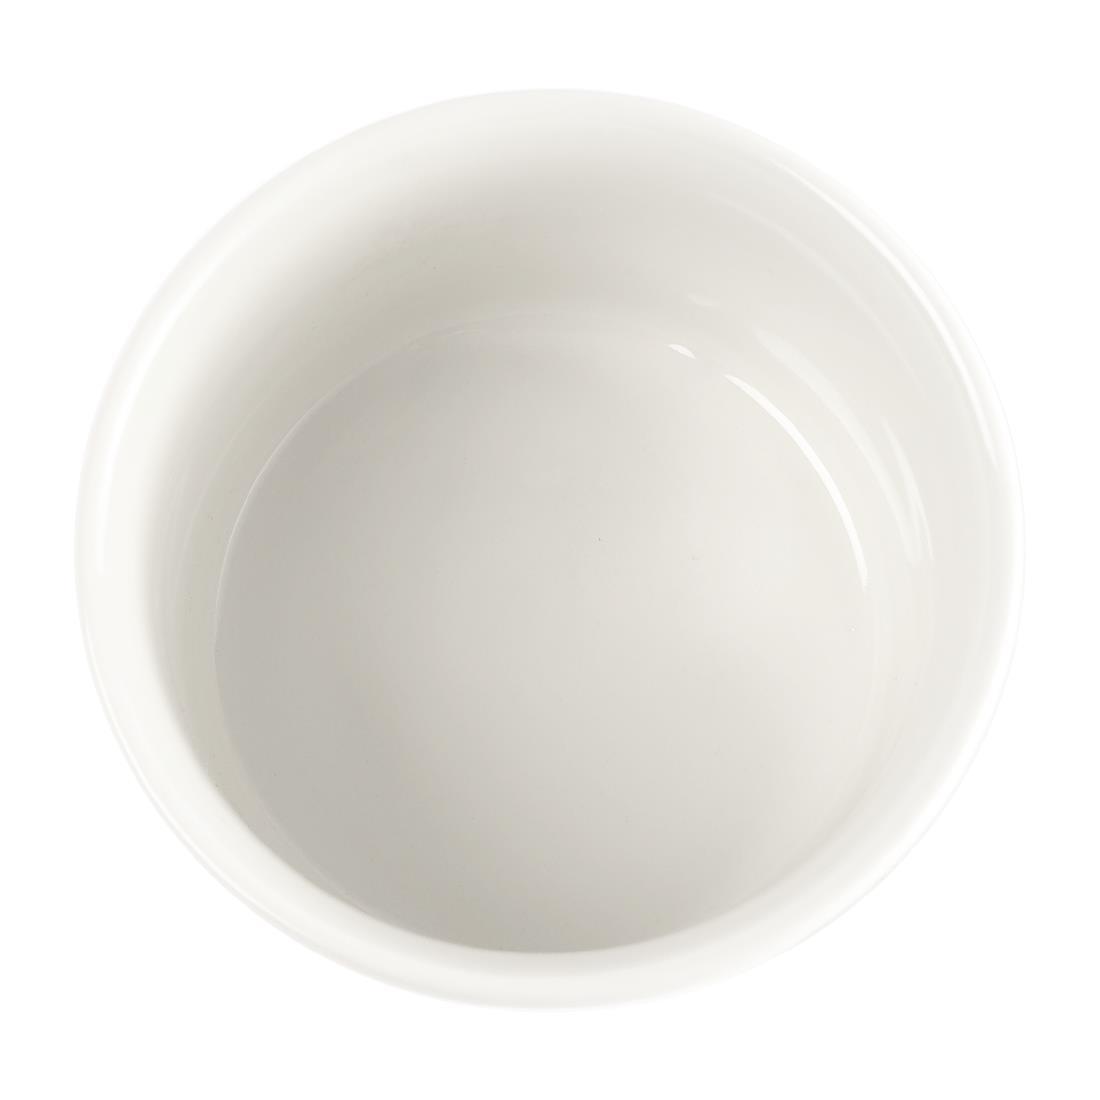 Churchill White Souffle Dishes 100mm (Pack of 12) - DK657  - 2